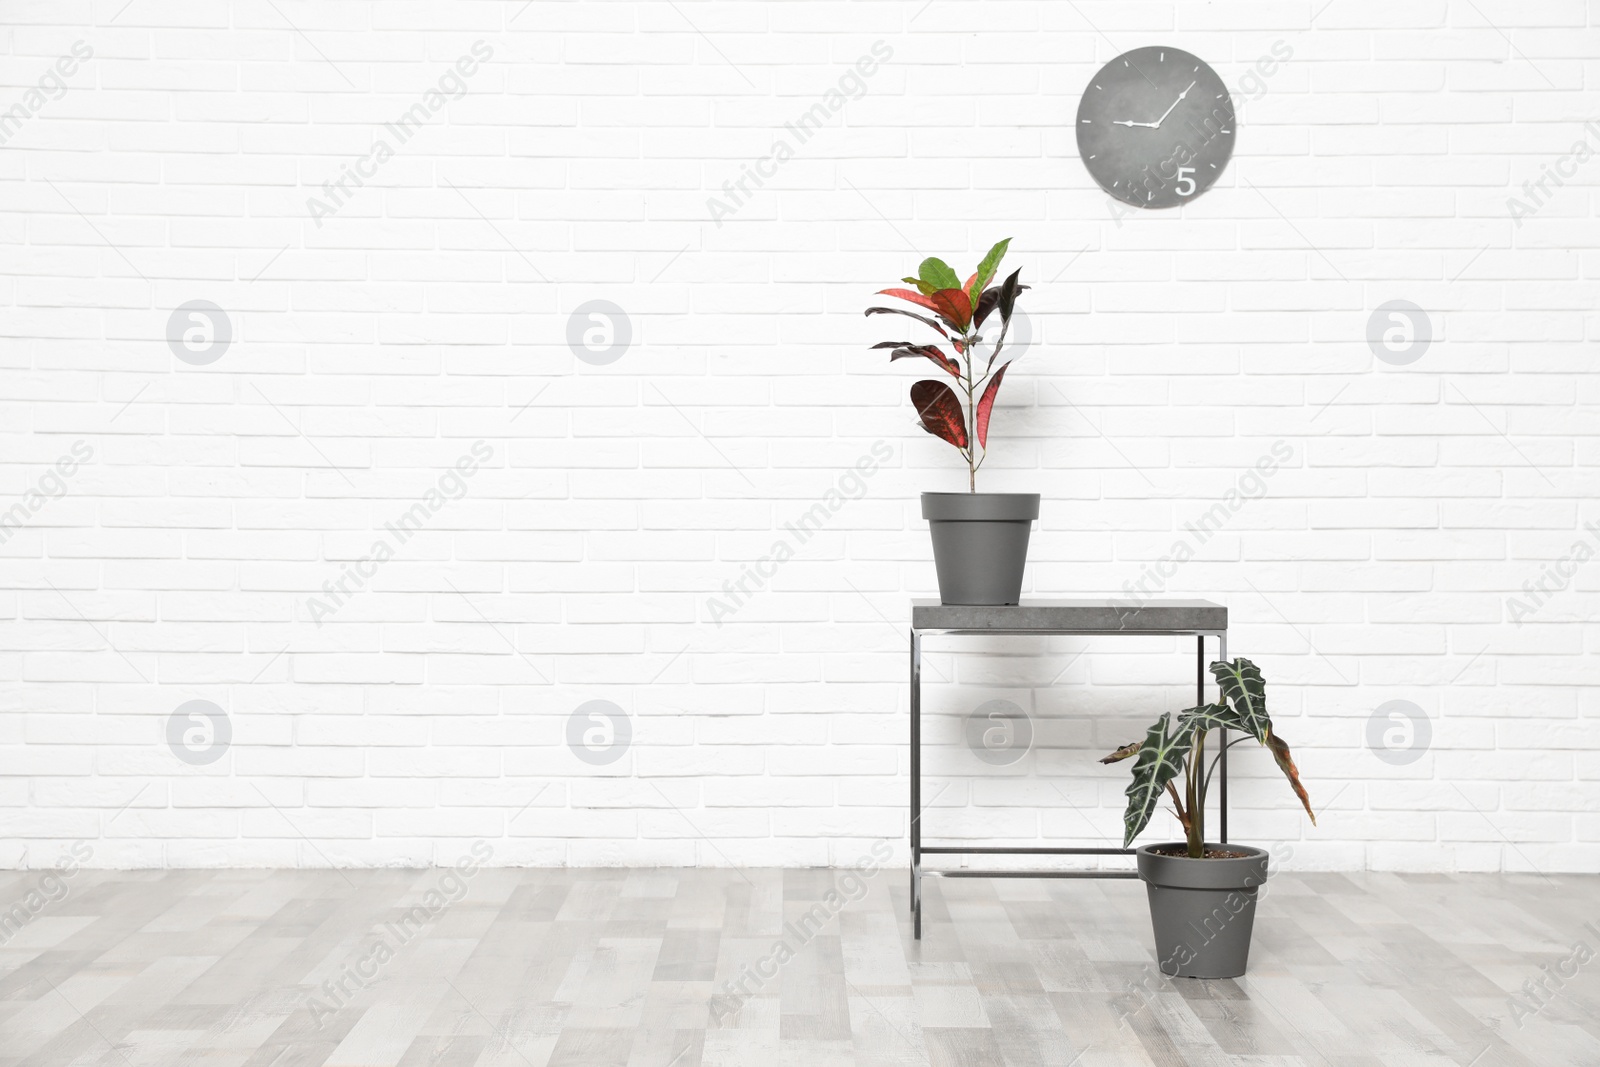 Photo of Table and indoor plants at white brick wall, space for text. Trendy home interior decor